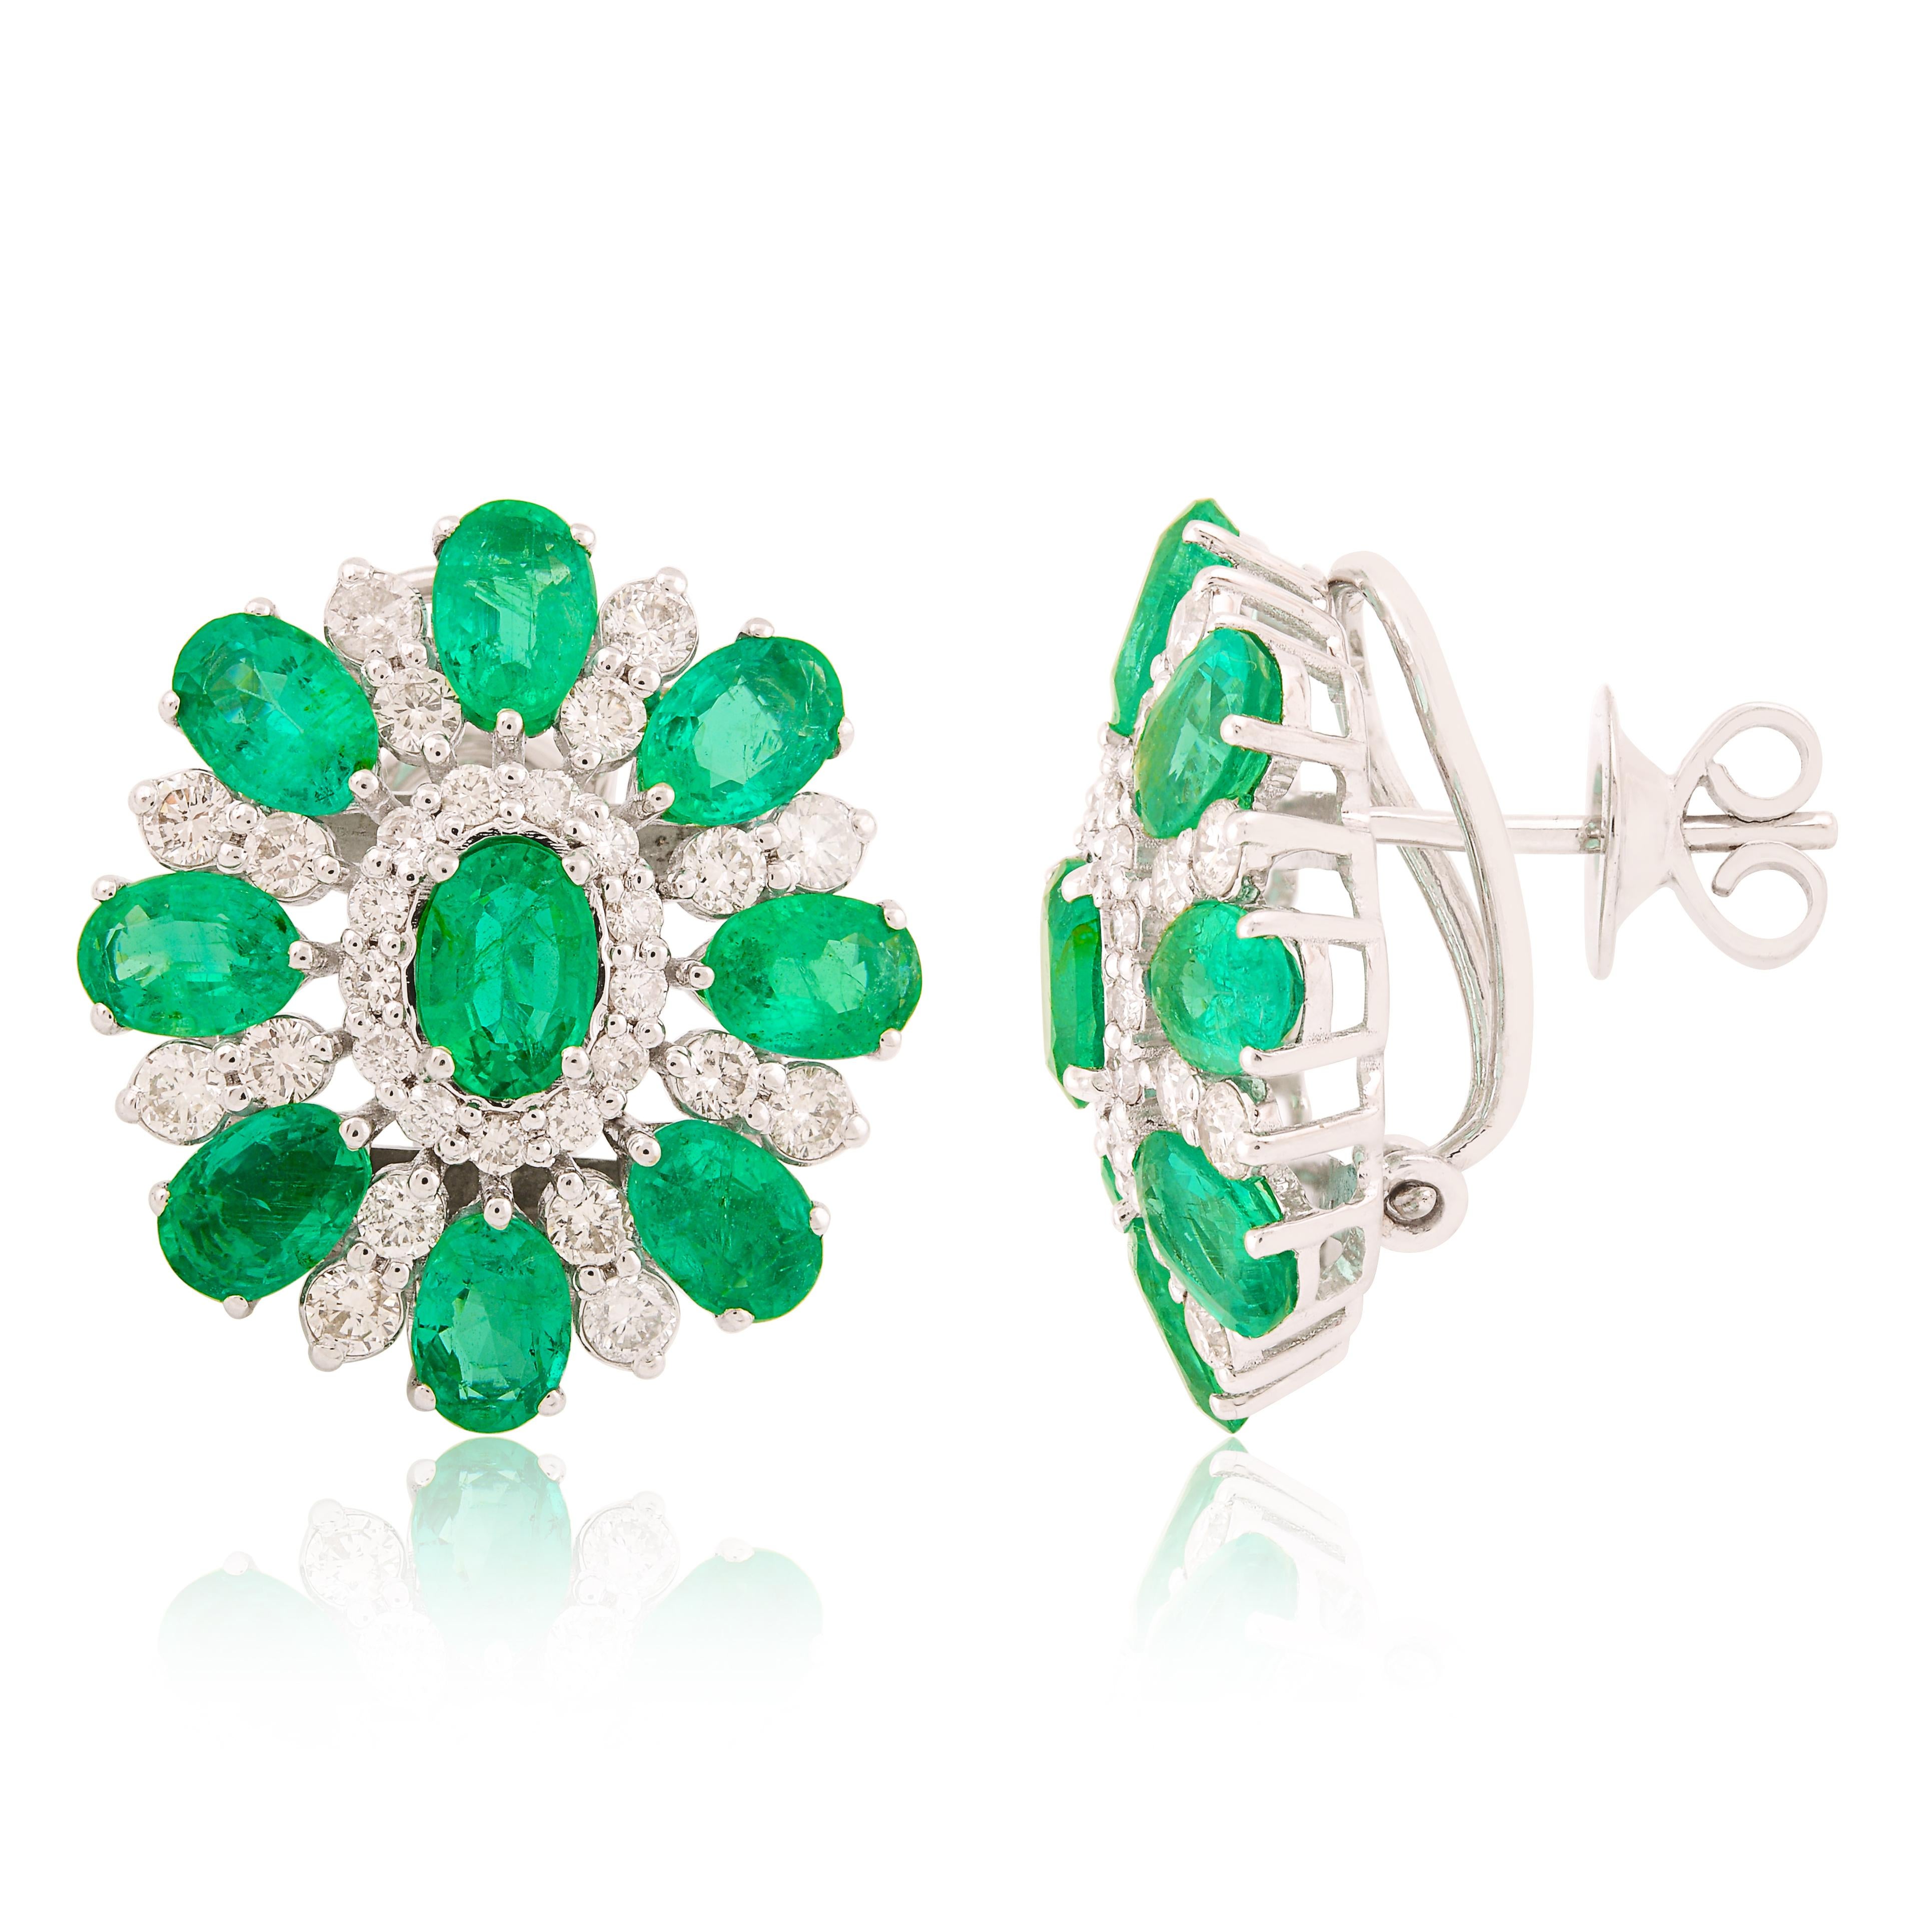 Item Code:- SEE-11767
Gross Weight :- 11.06 gm
18k Solid White Gold Weight :- 9.25 gm
Natural Diamond Weight :- 1.7 ct  ( AVERAGE DIAMOND CLARITY SI1-SI2 & COLOR H-I )
Zambian Emerald Weight :- 7.35 ct
Earring Size : 22 mm (approx.)

✦